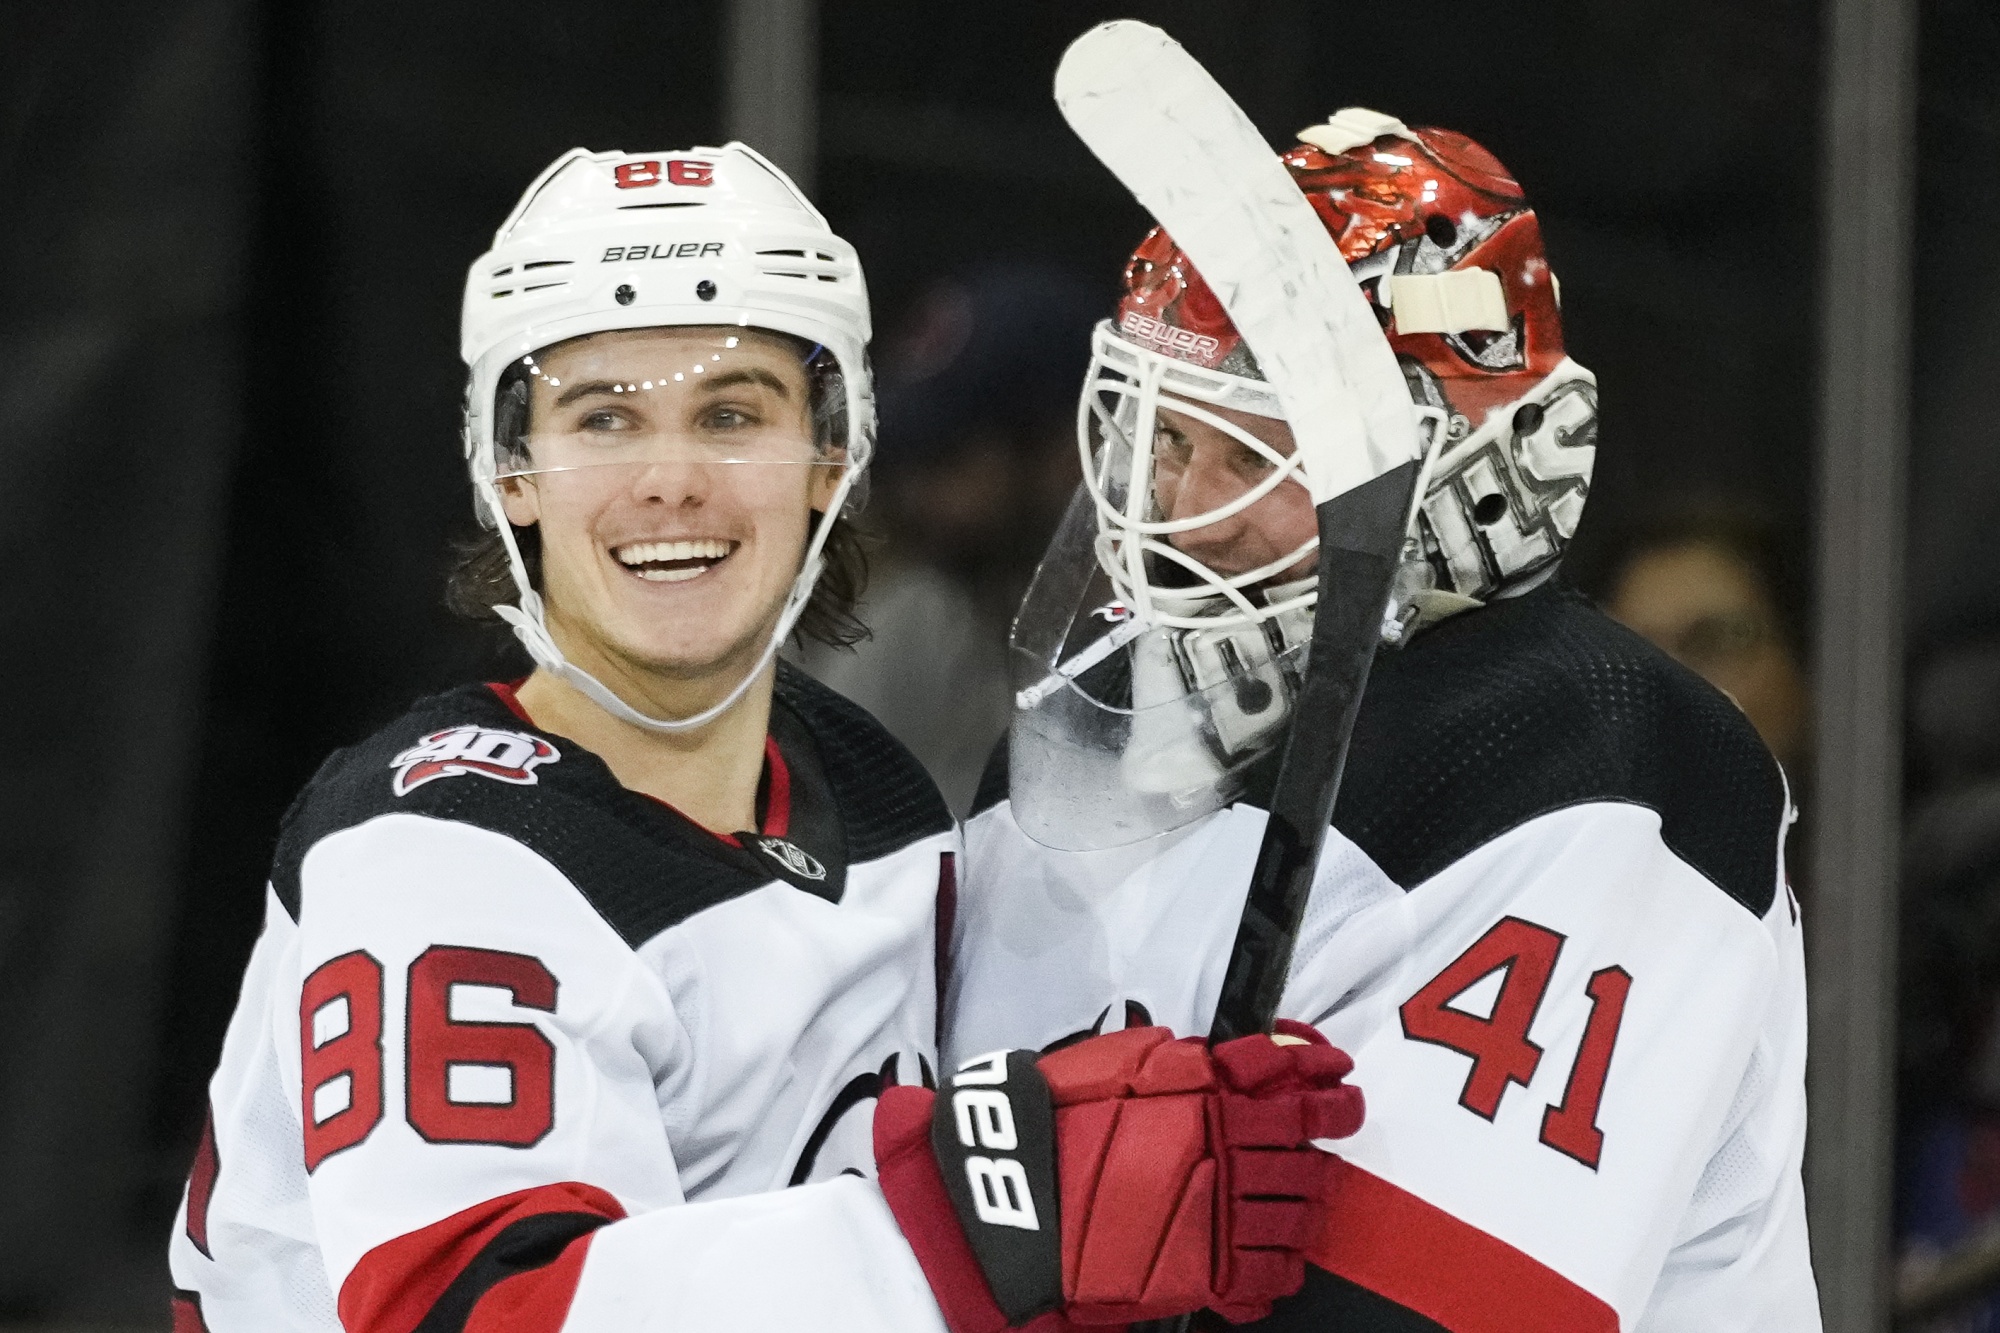 New Jersey Devils: Can Miles Wood Play Well Again?